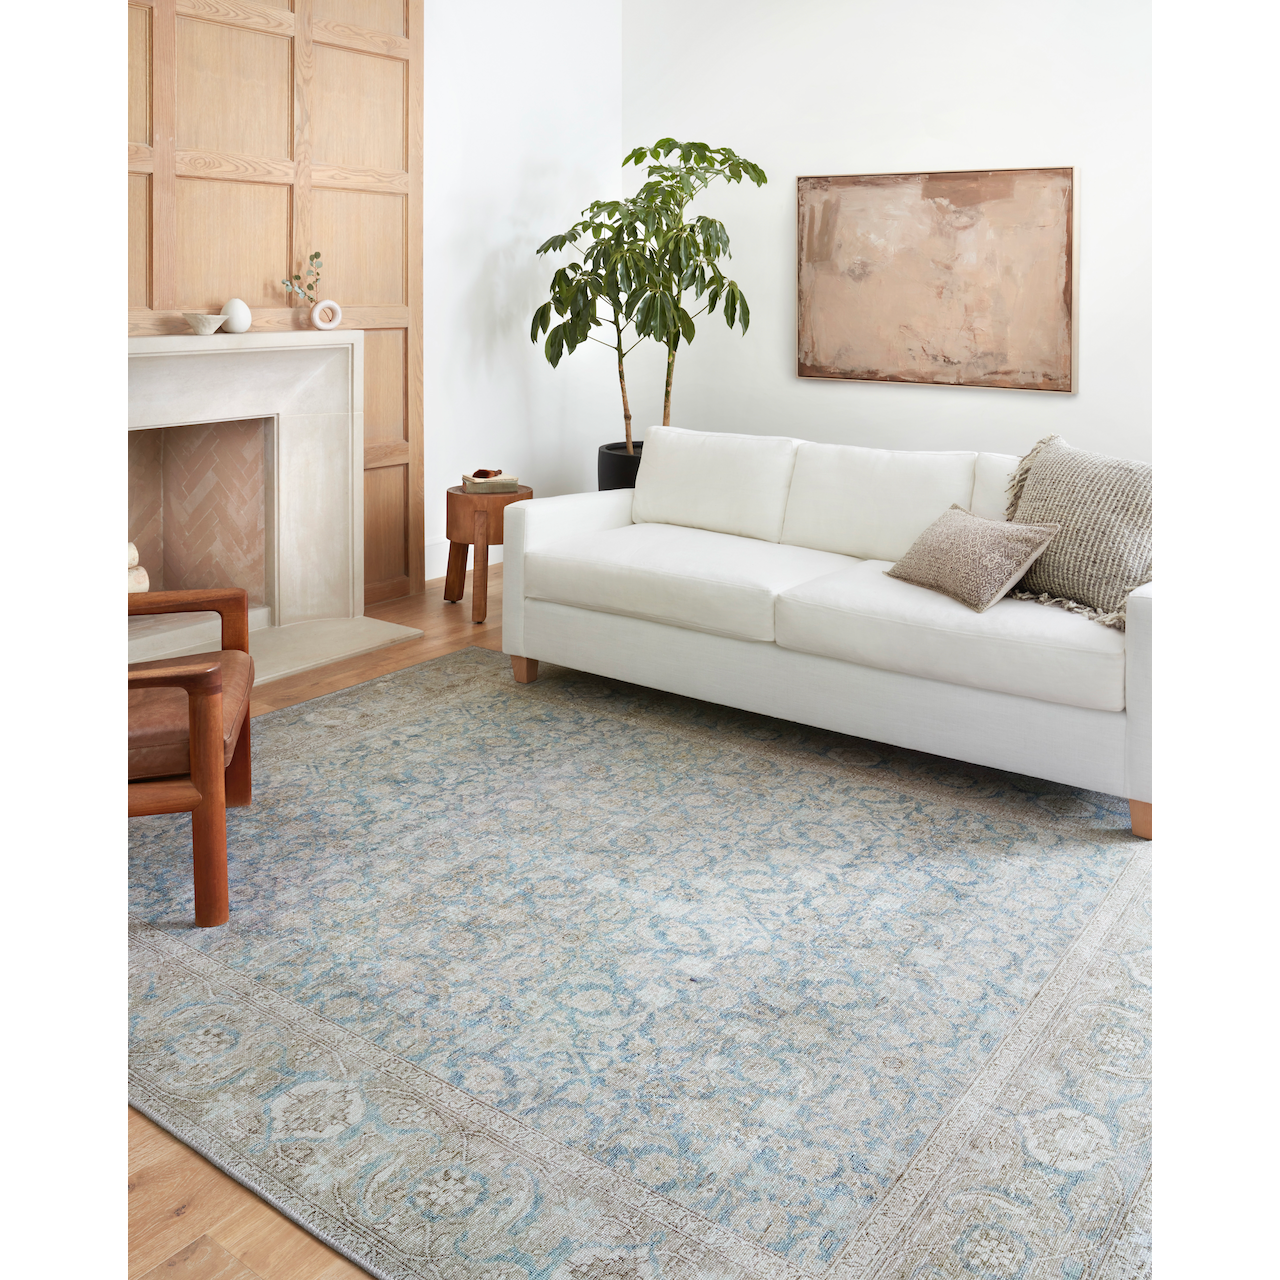 Power-loomed of 100% polyester, the Wynter Ocean / Silver WYN-10 area rug from Loloi showcases a one-of-a-kind vintage or antique area rug look at an affordable price. The rug is ideal for high traffic areas due to the rug's durability making it perfect for living rooms, dining rooms, kitchens, hallways, entryways. Amethyst Home provides interior design, new construction, custom furniture, and rugs for the Denver and Colorado Springs metro area.